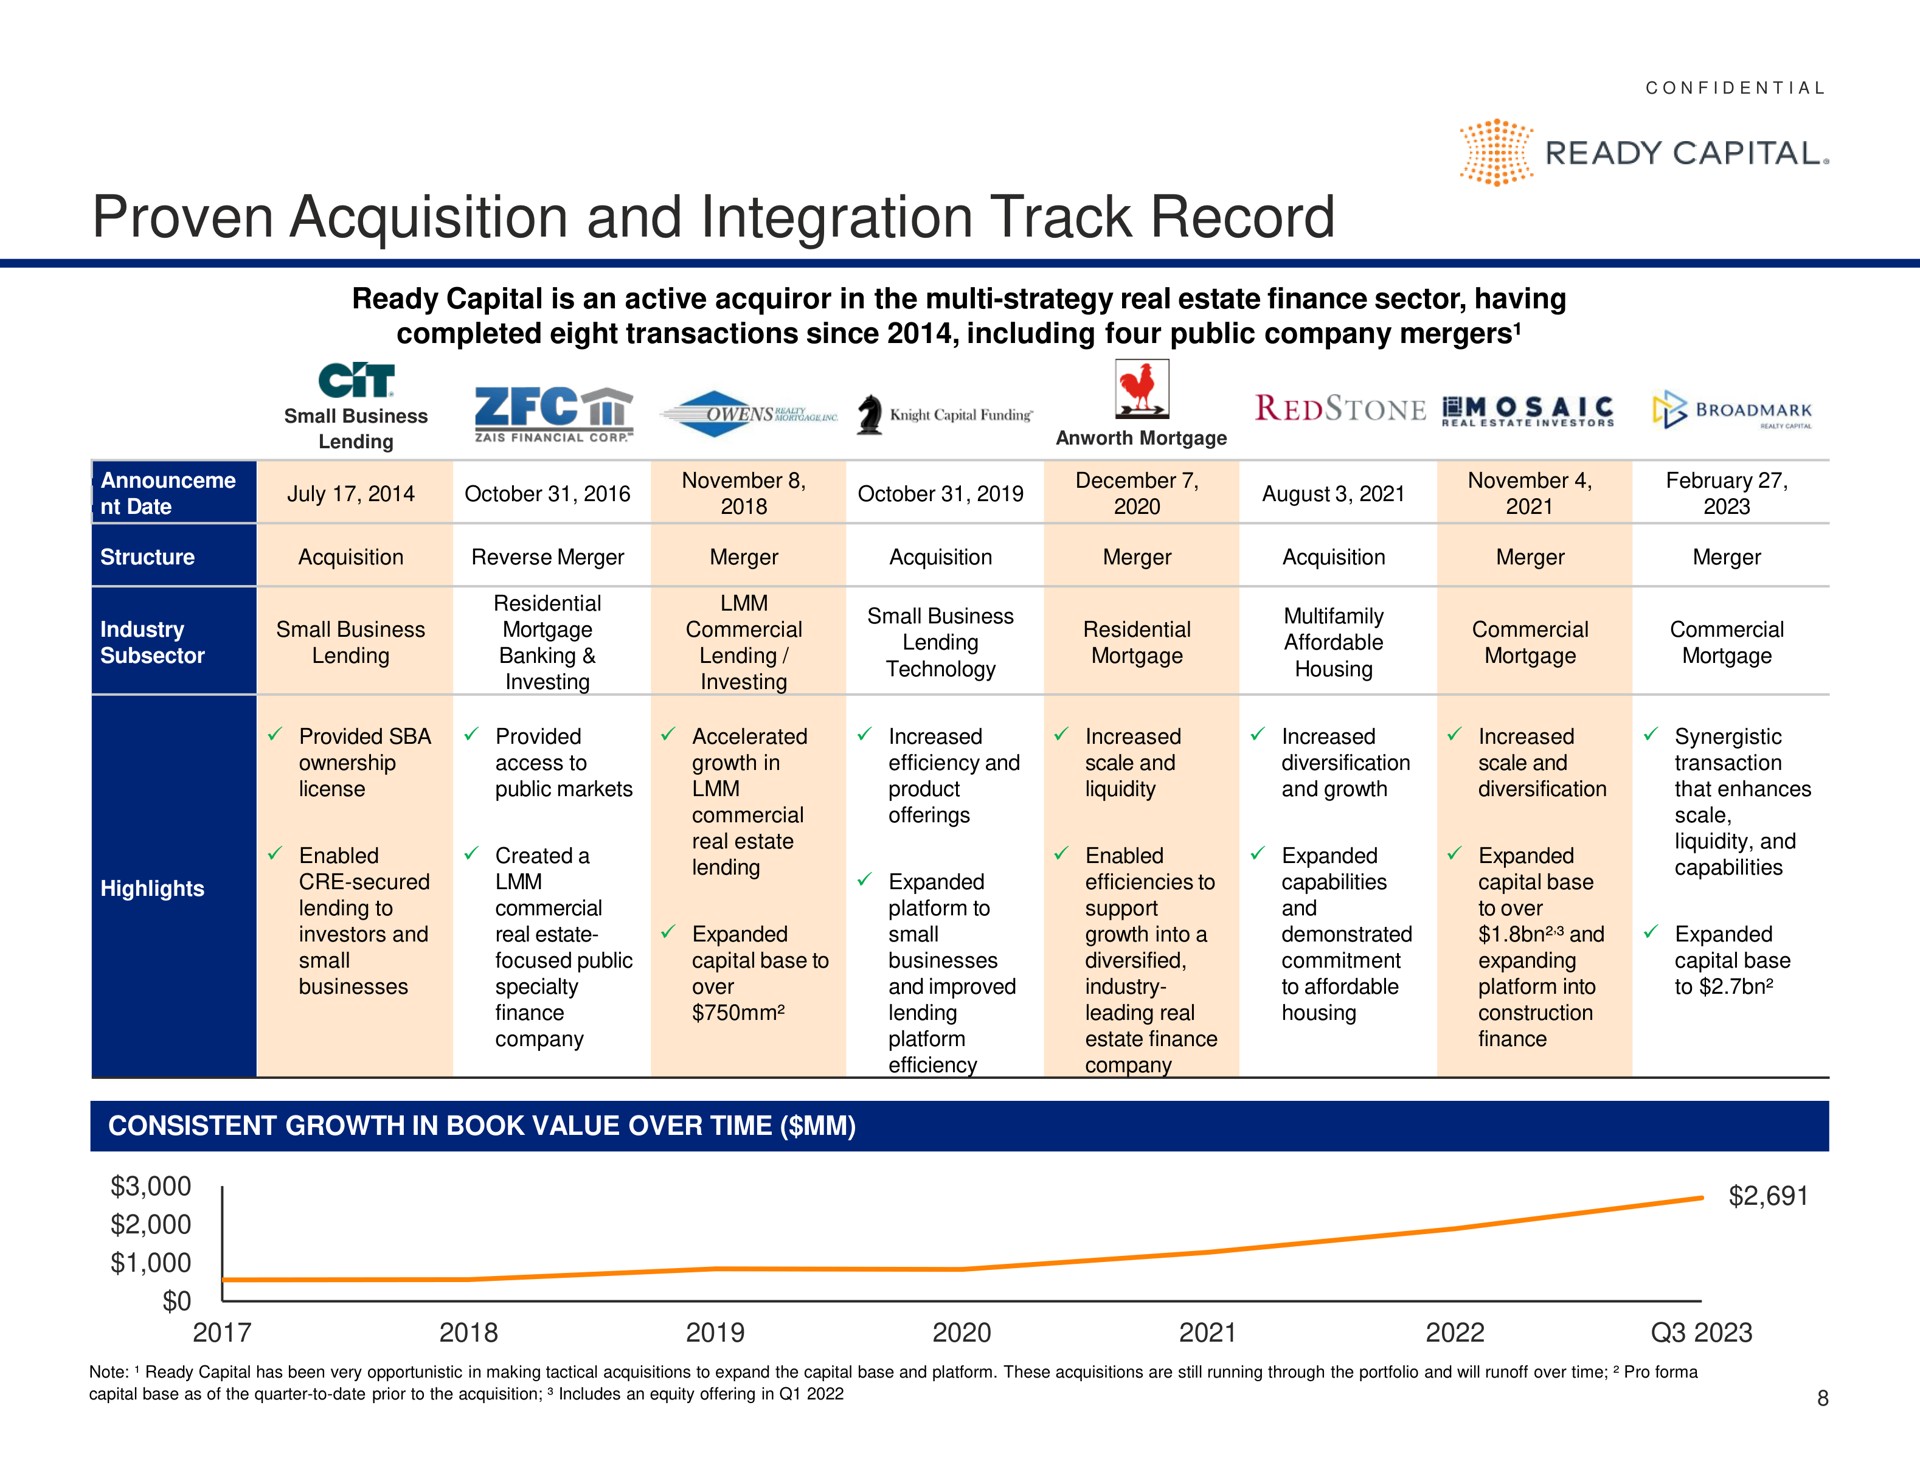 proven acquisition and integration track record cit | Ready Capital